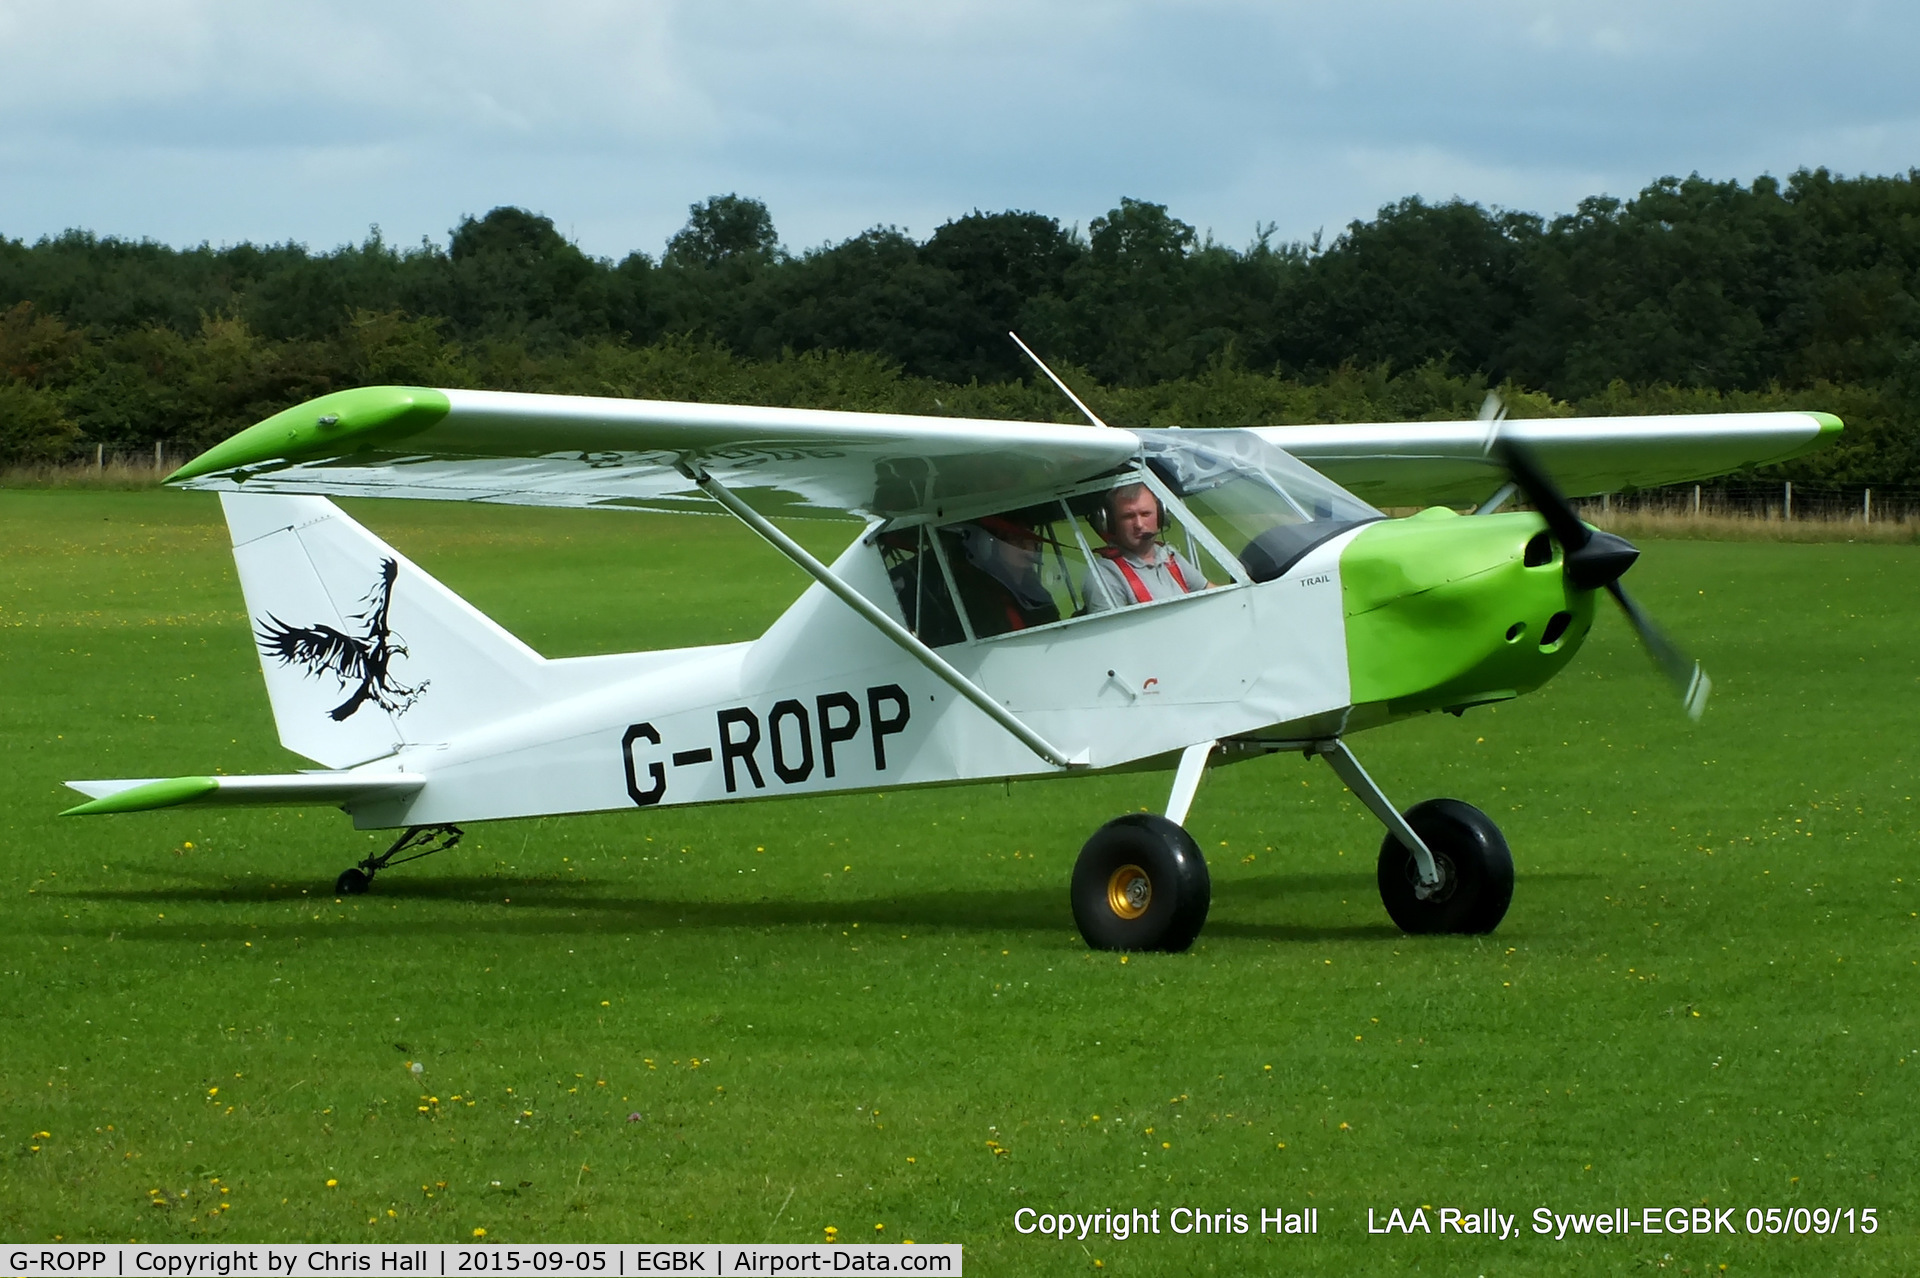 G-ROPP, 2012 Nando Groppo Trial C/N LAA 372-15178, at the LAA Rally 2015, Sywell